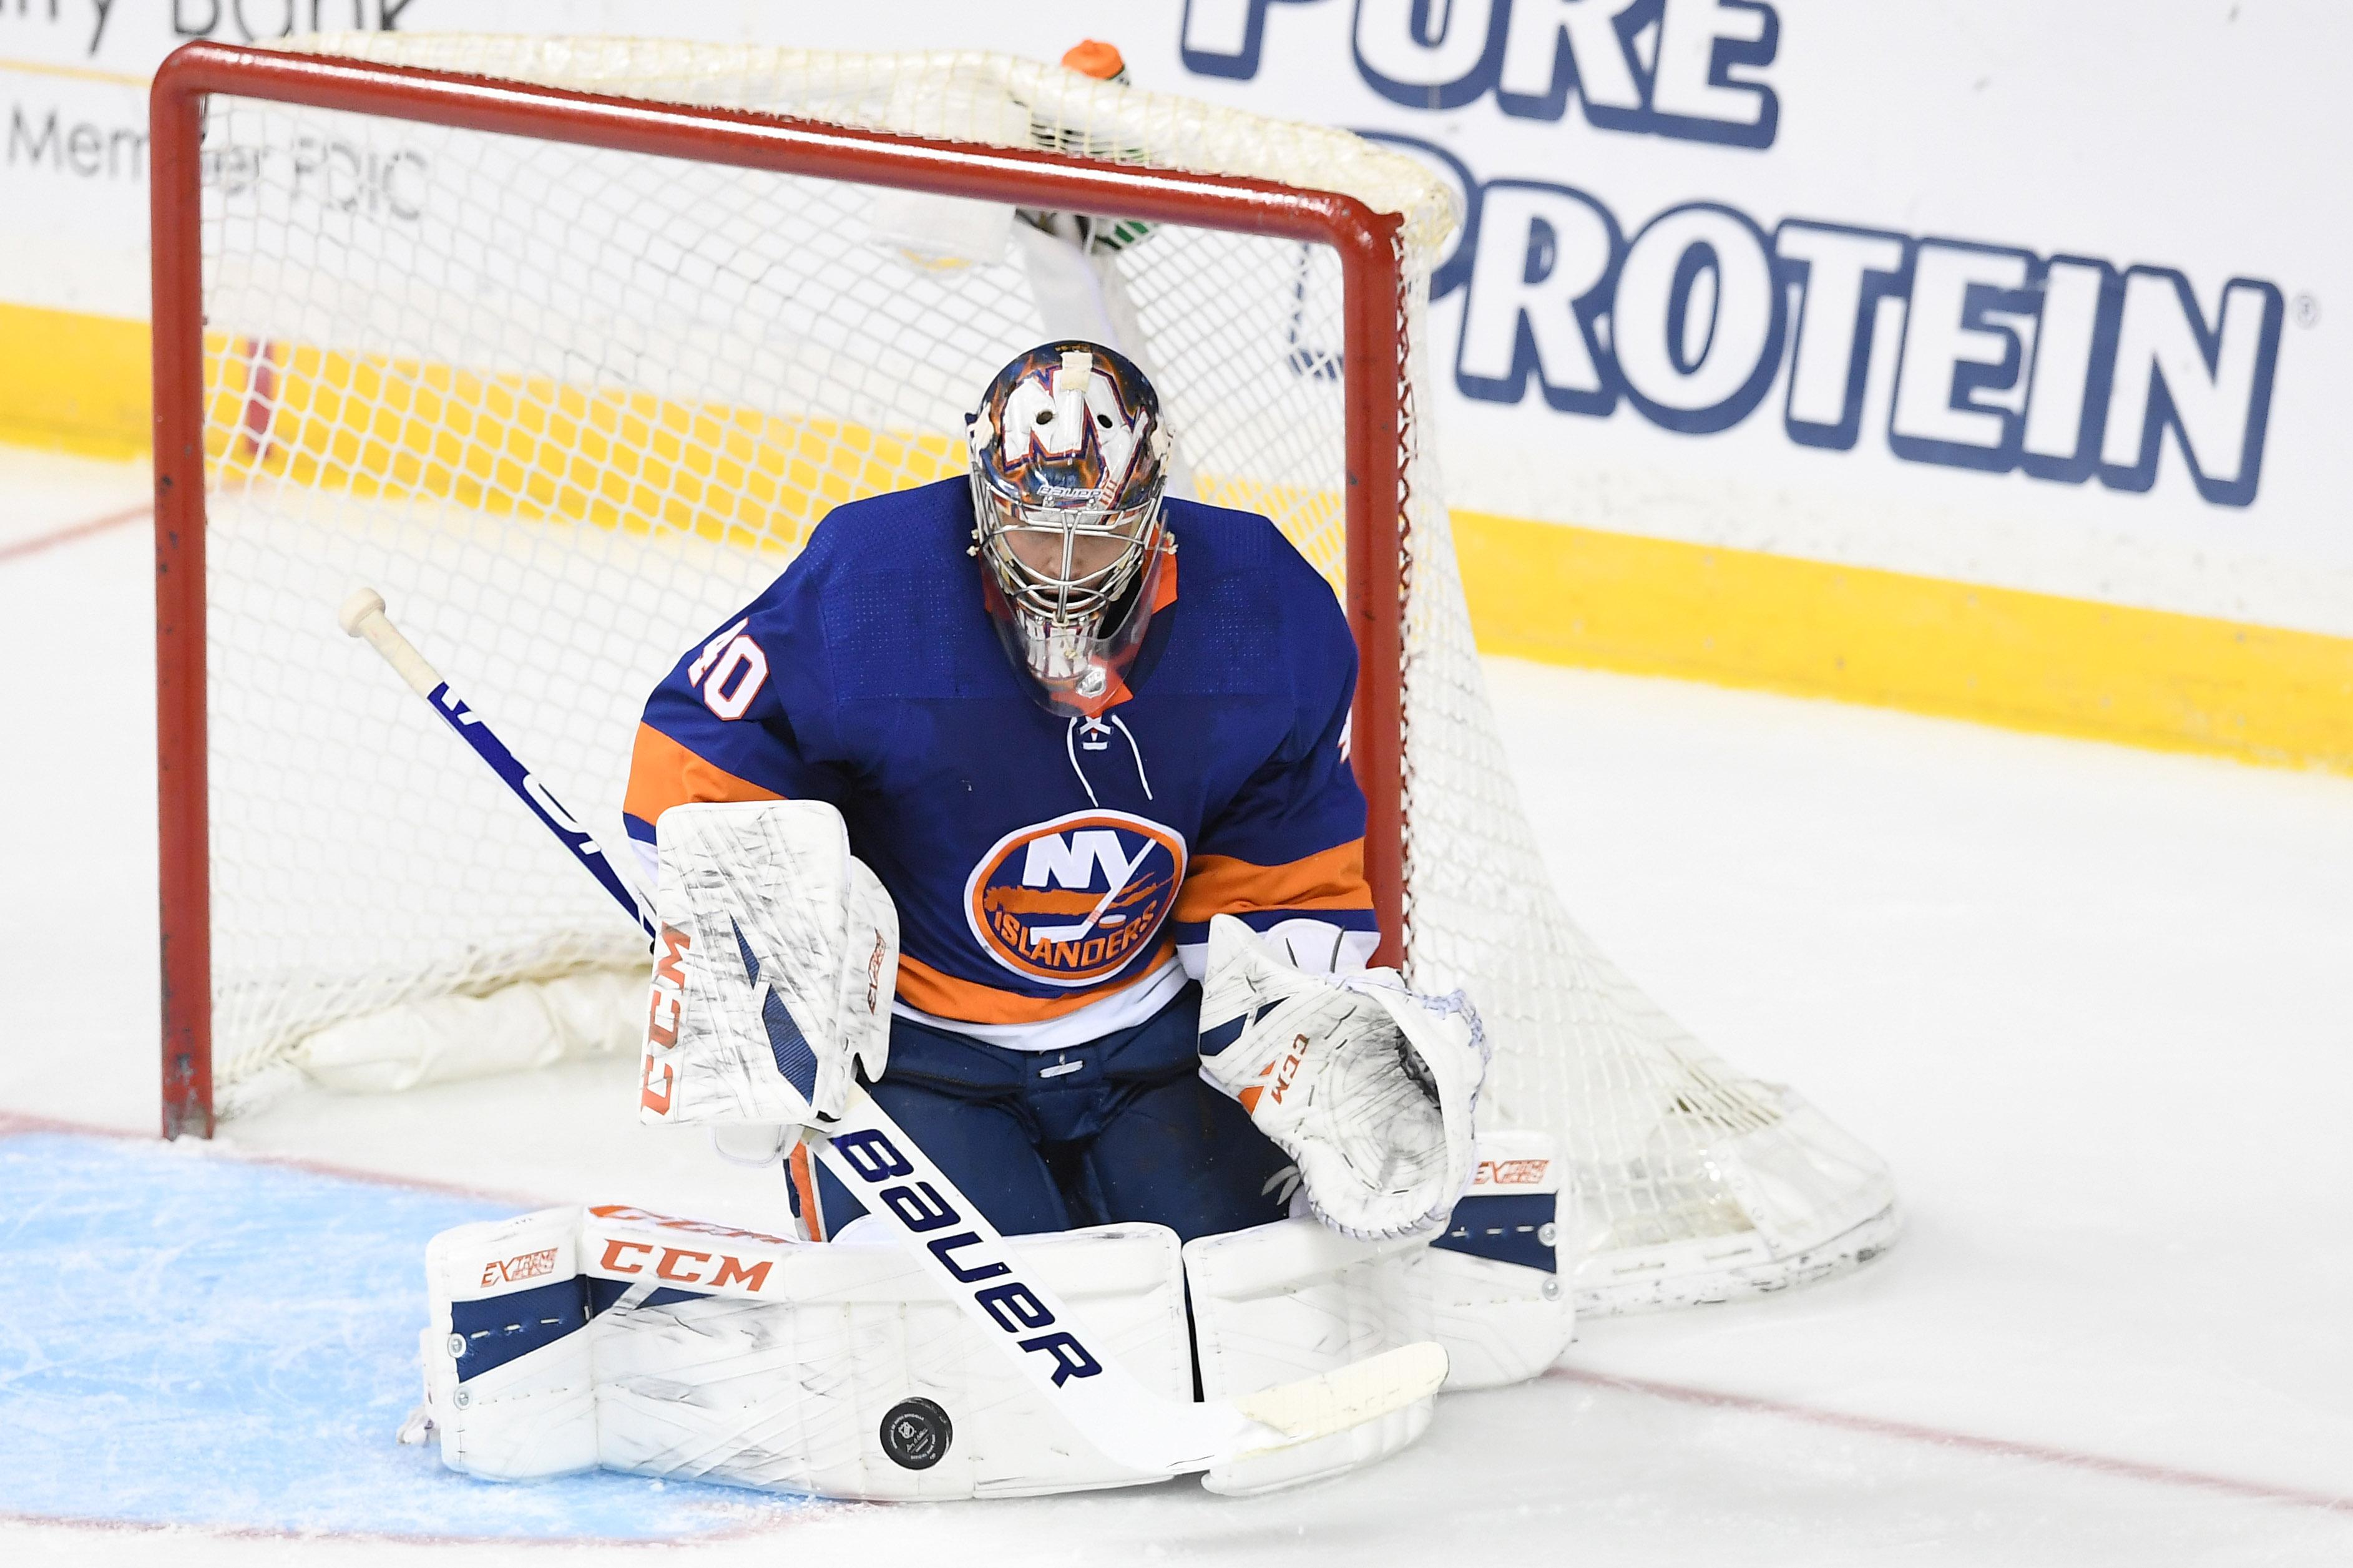 New York Islanders goaltender Semyon Varlamov (40) makes a save during the third period against the Boston Bruins at Barclays Center. / Sarah Stier-USA TODAY Sports